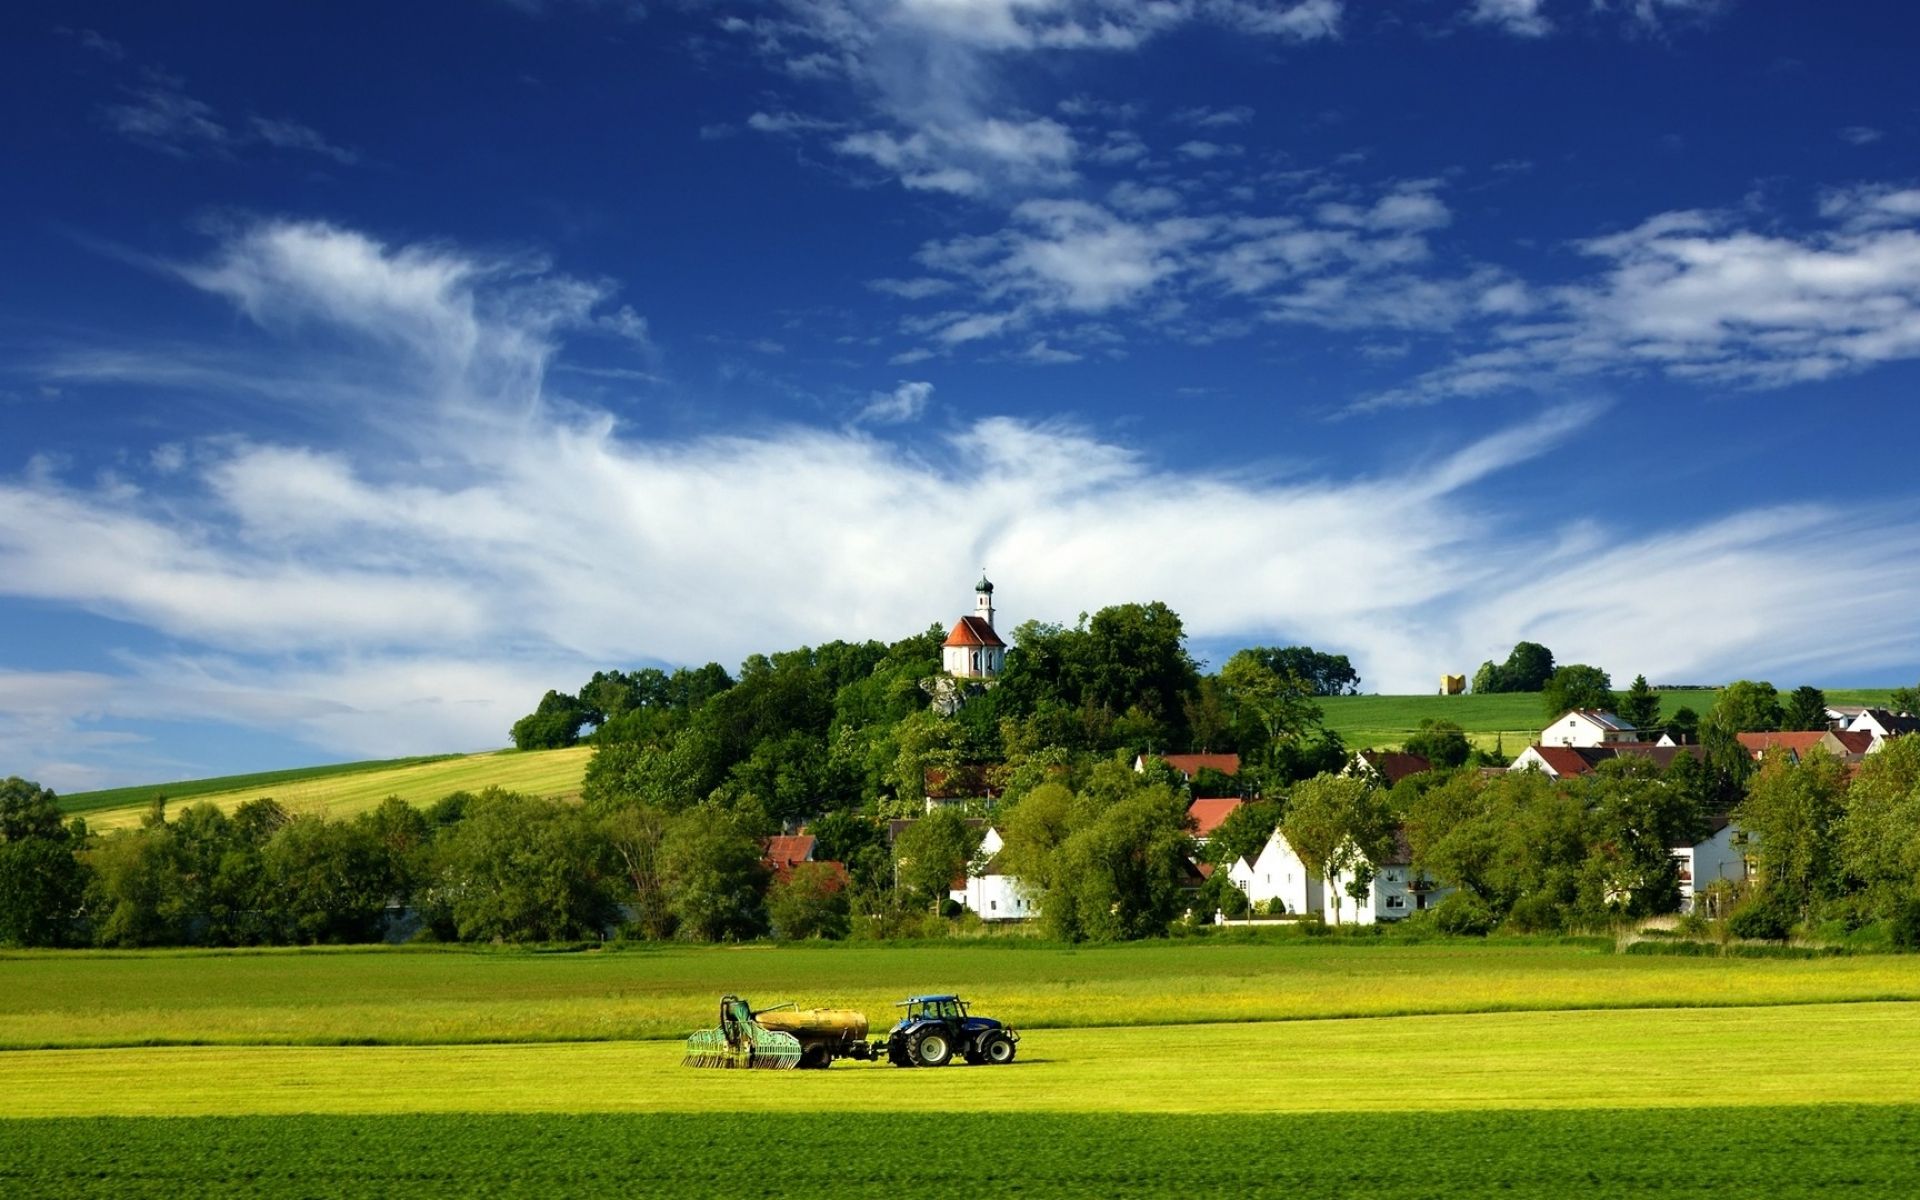 Free download Tractor Village and Farm Country desktop wallpaper